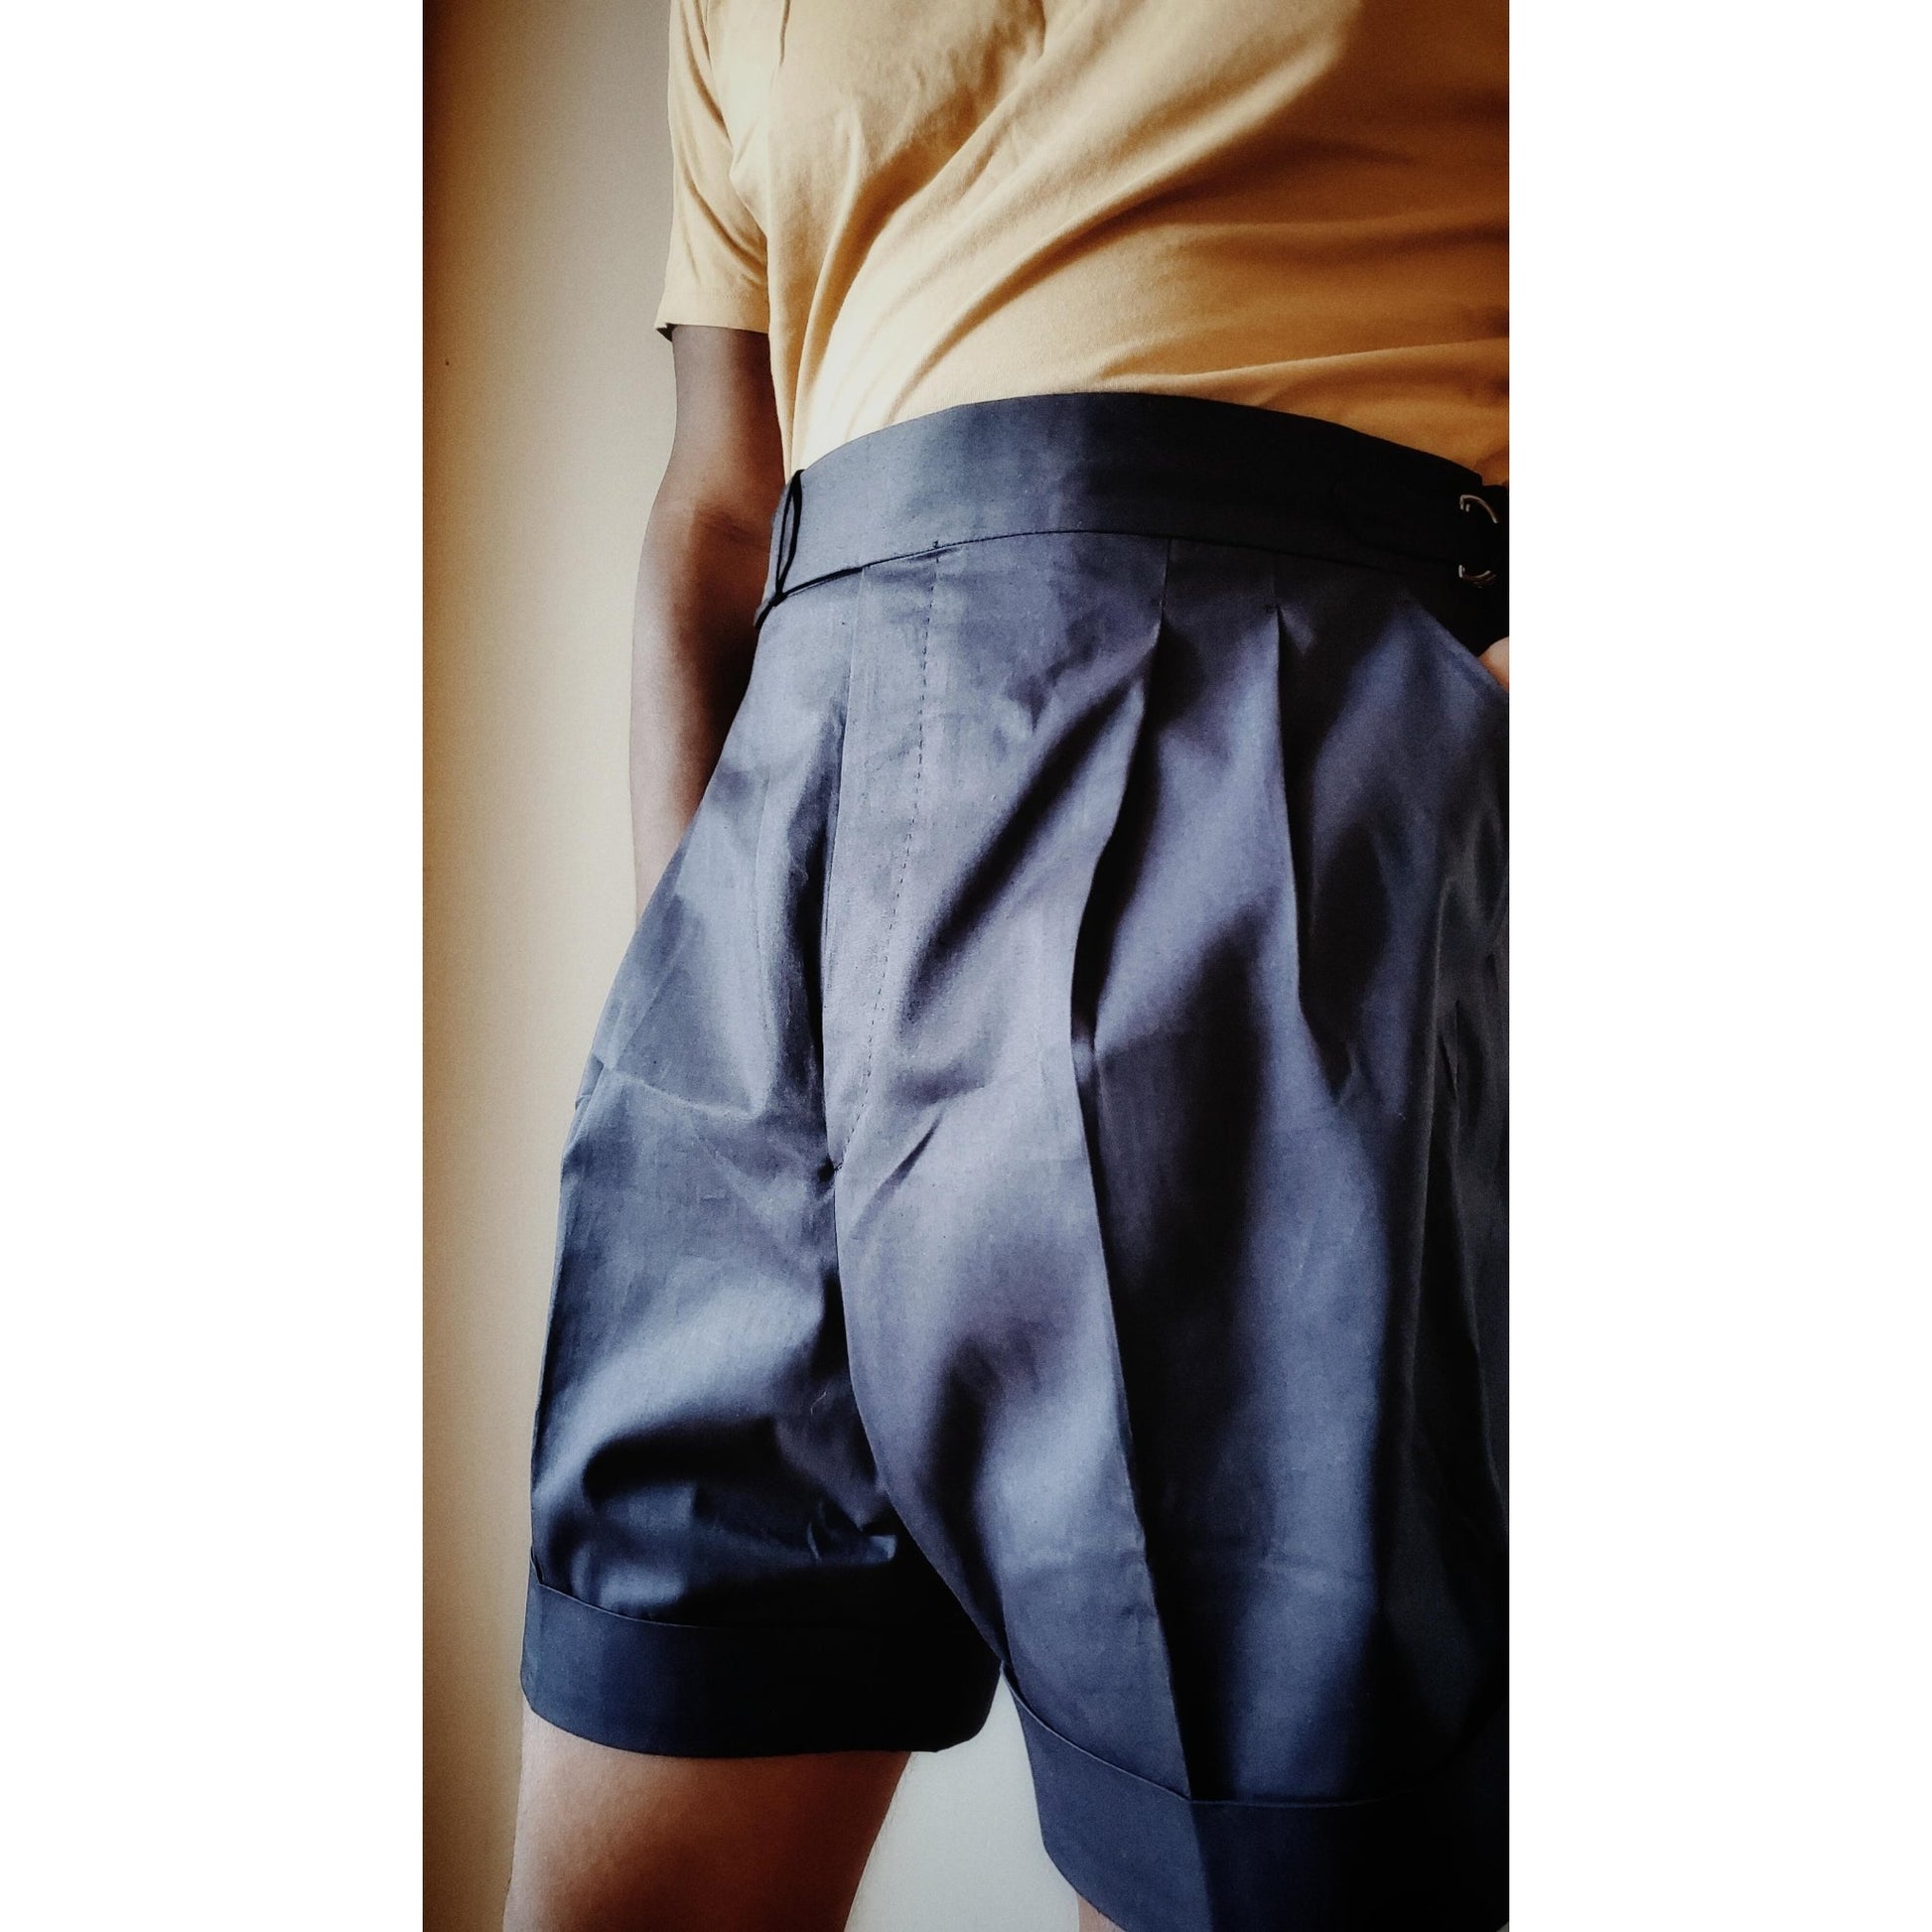 High Waisted Shorts - Cotton Panama - X Of Pentacles